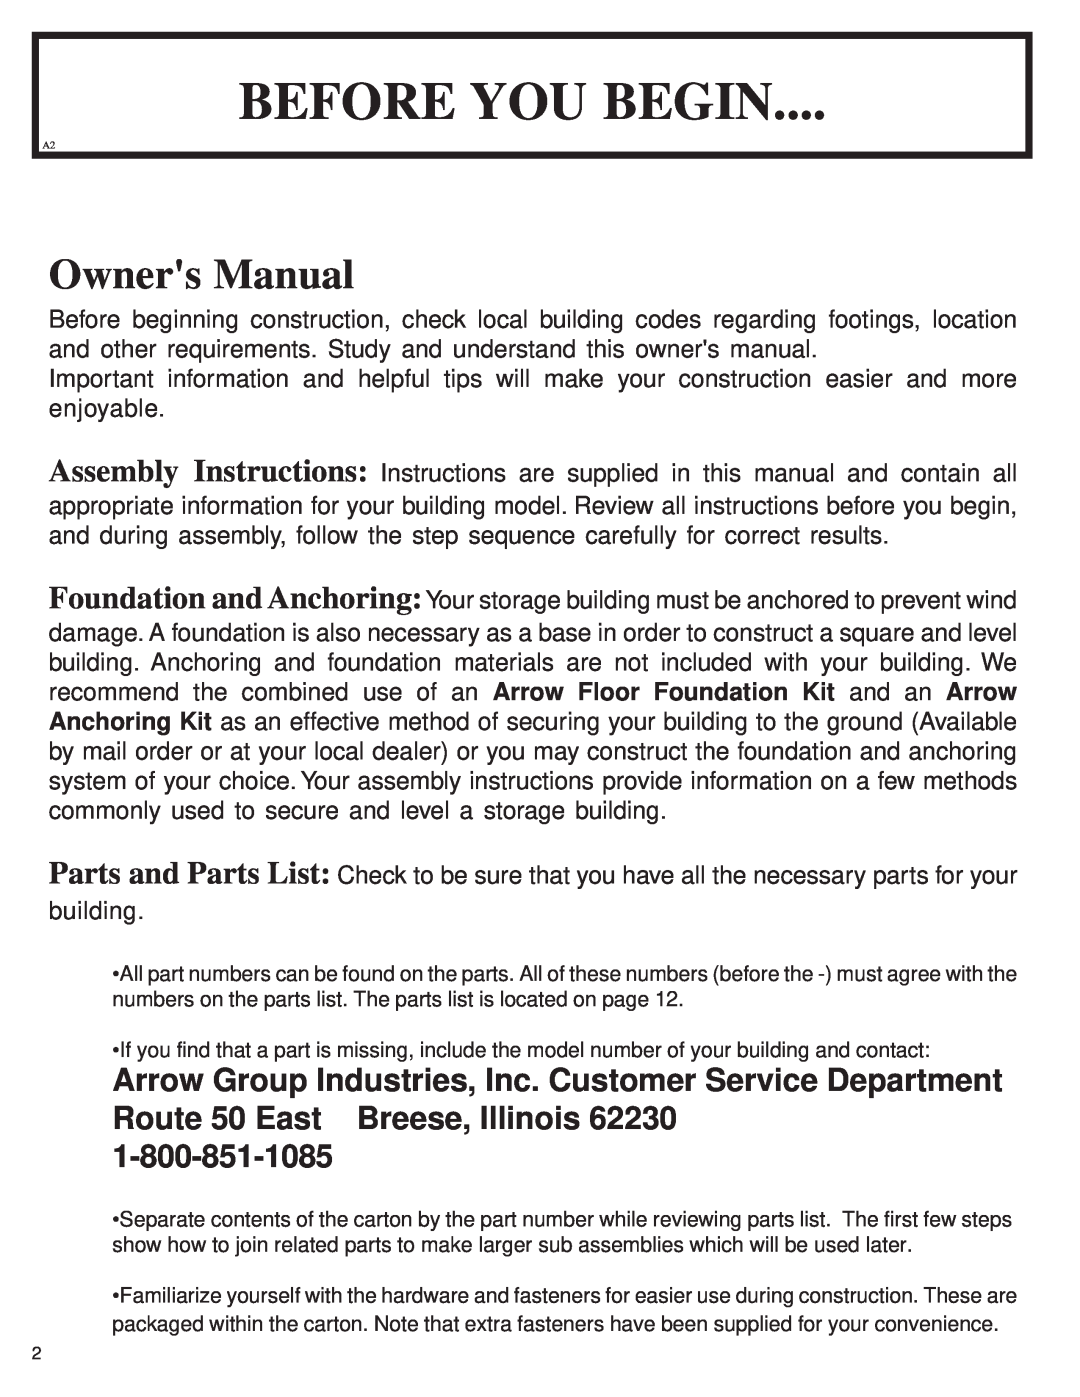 Arrow Plastic CL72-A owner manual Before You Begin 